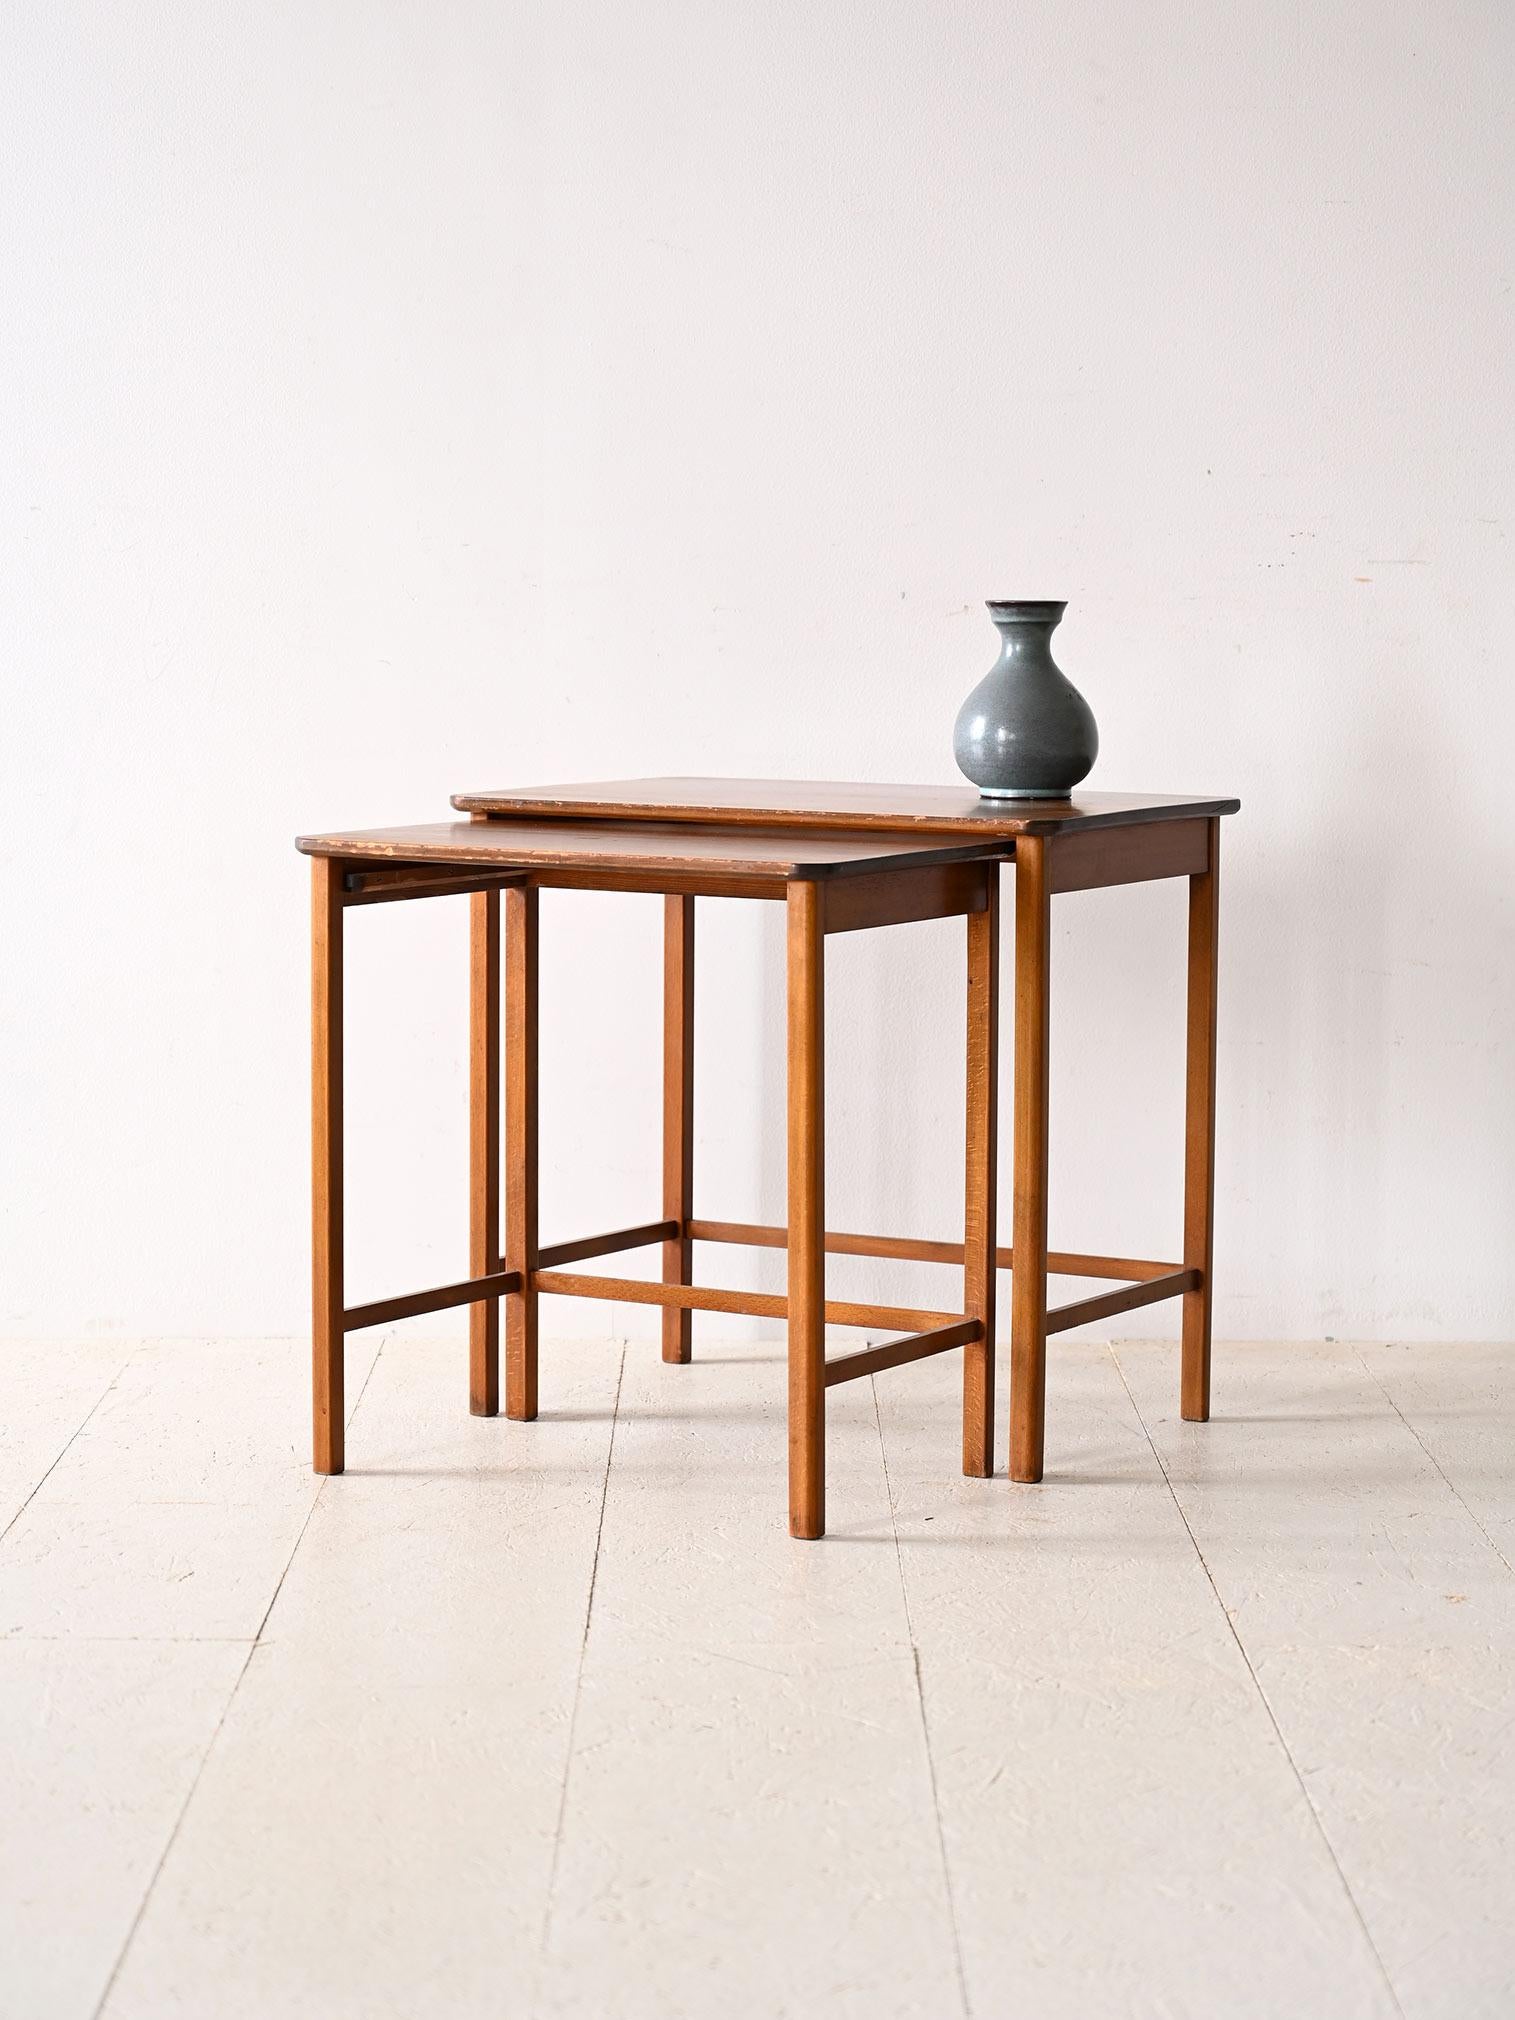 Set of two 1960s nesting tables.

These two small tables are ideal for those who have limited space in their homes but do not want to give up a practical and visually pleasing tabletop.
Consist of a simple rectangular wooden top and long square